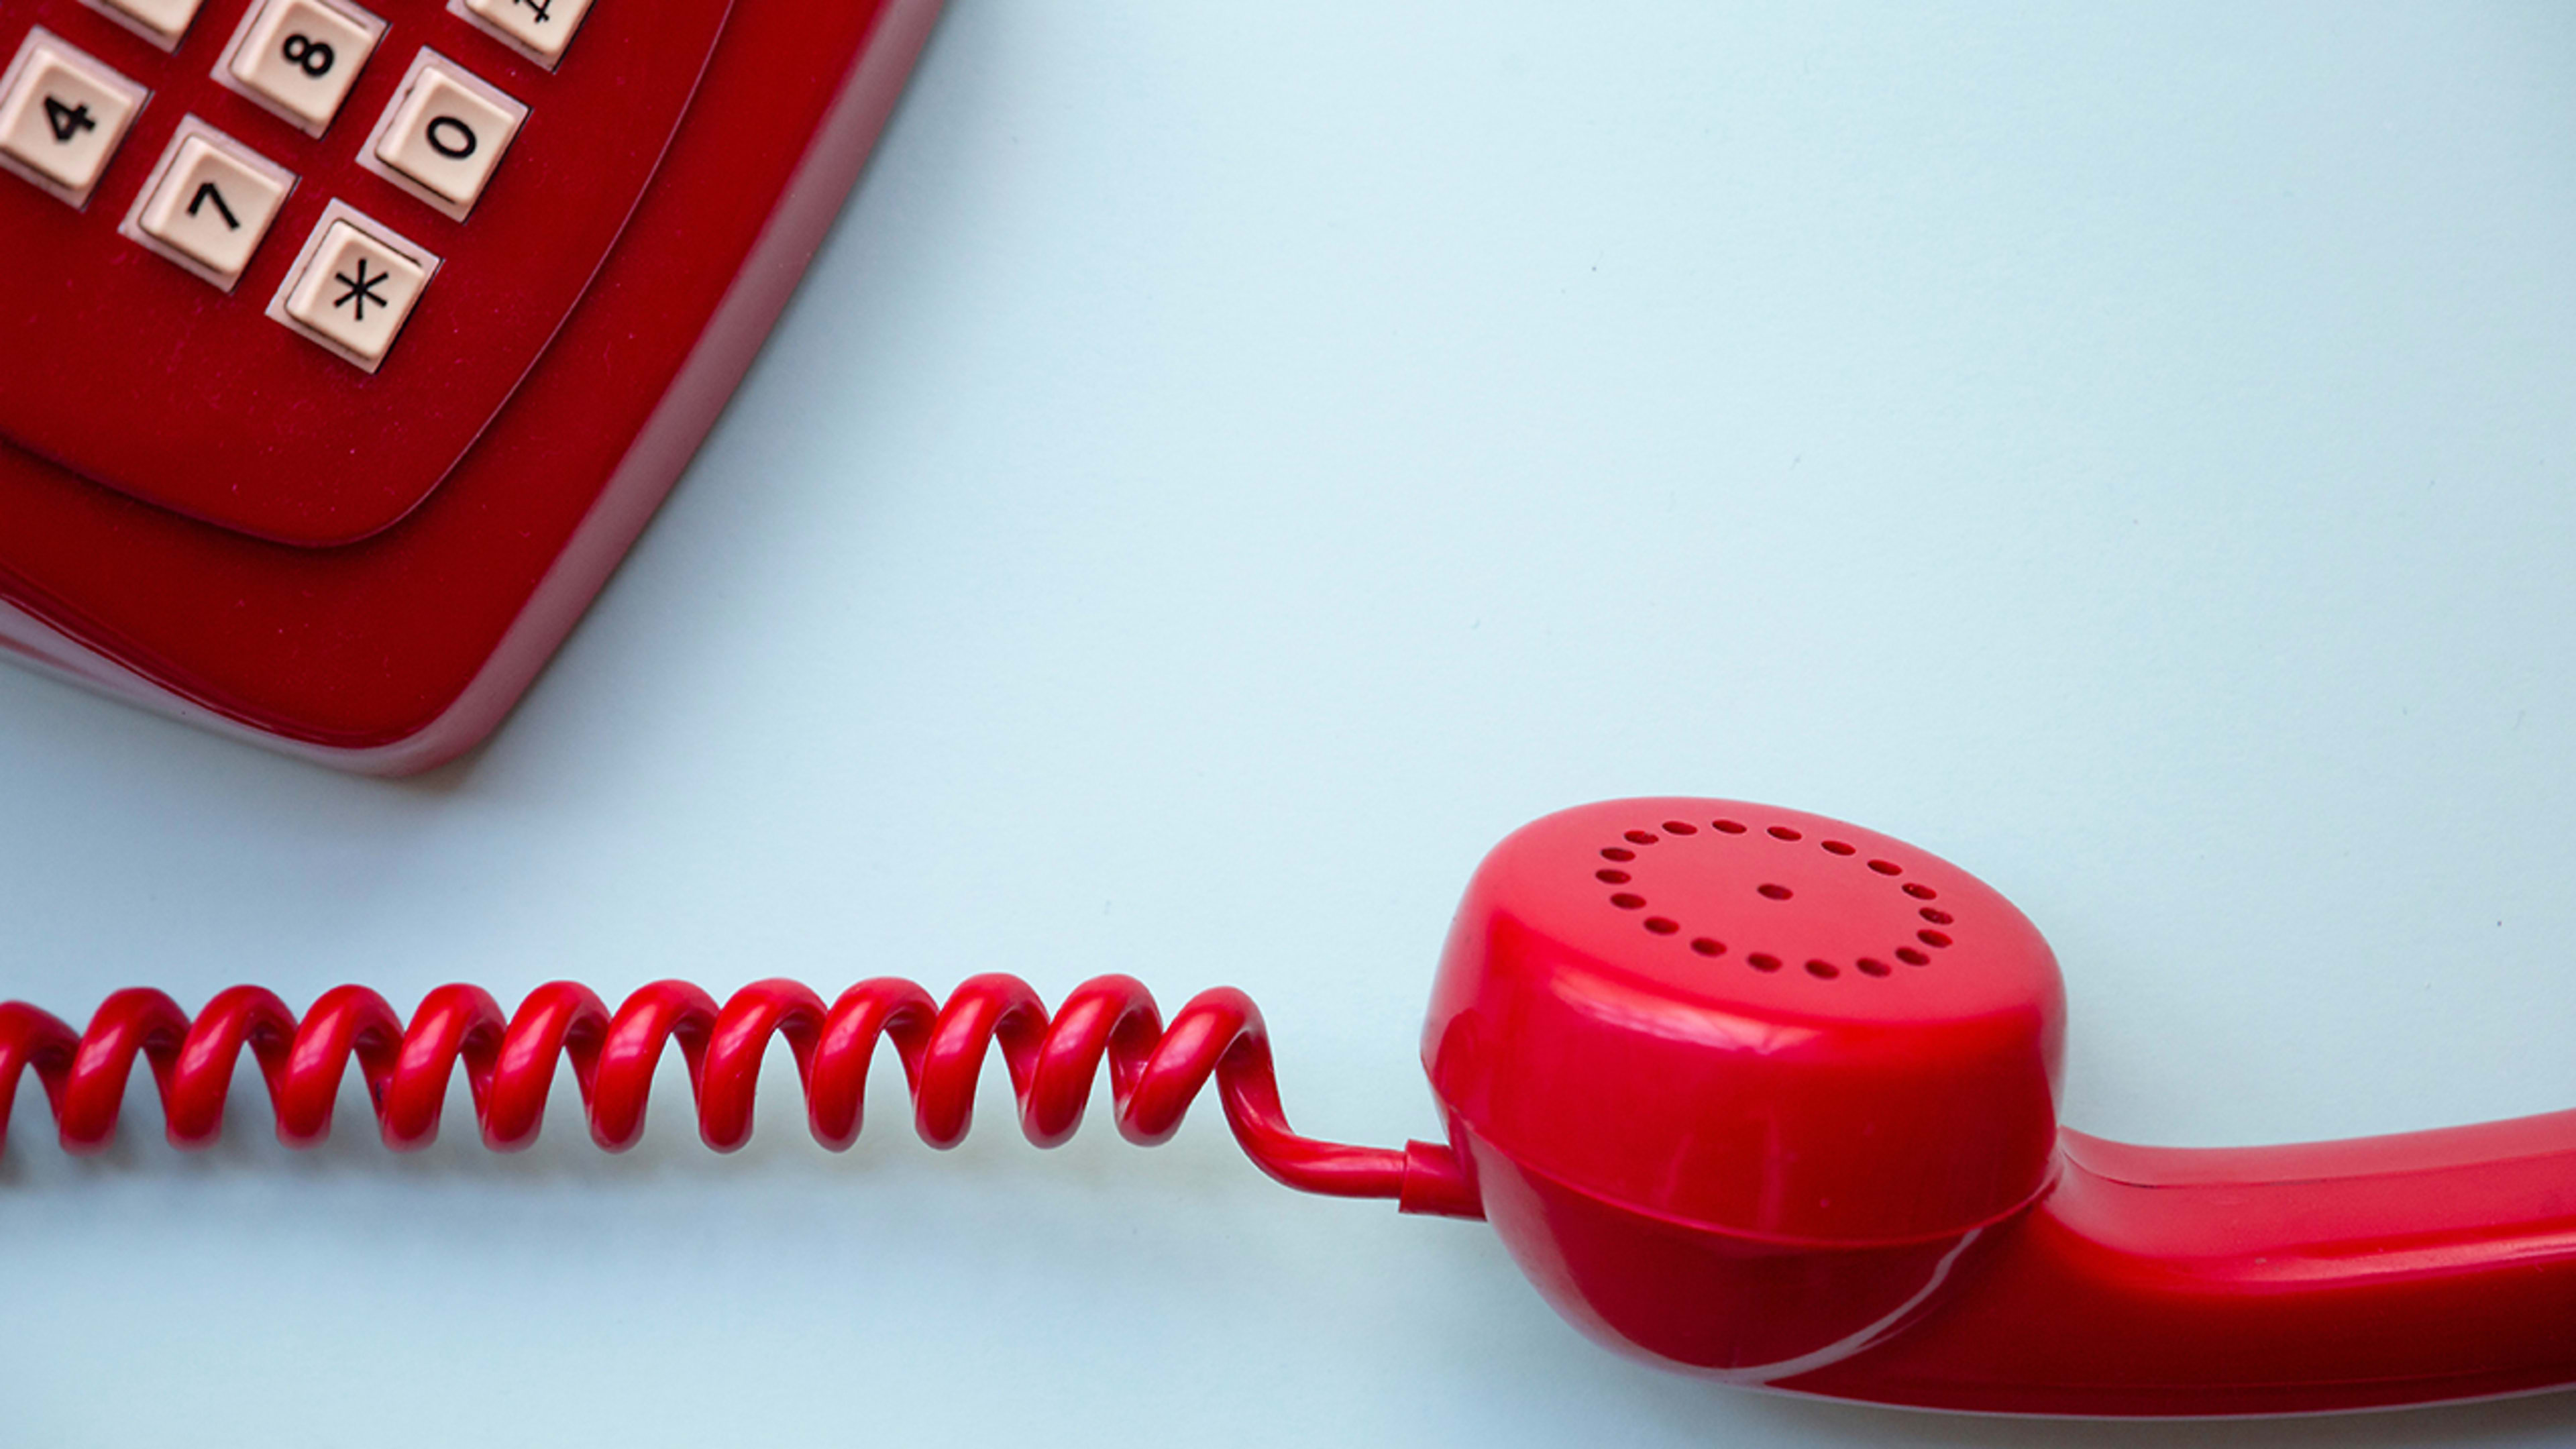 The White House is pumped about this anti-robocall law. We’re not celebrating yet